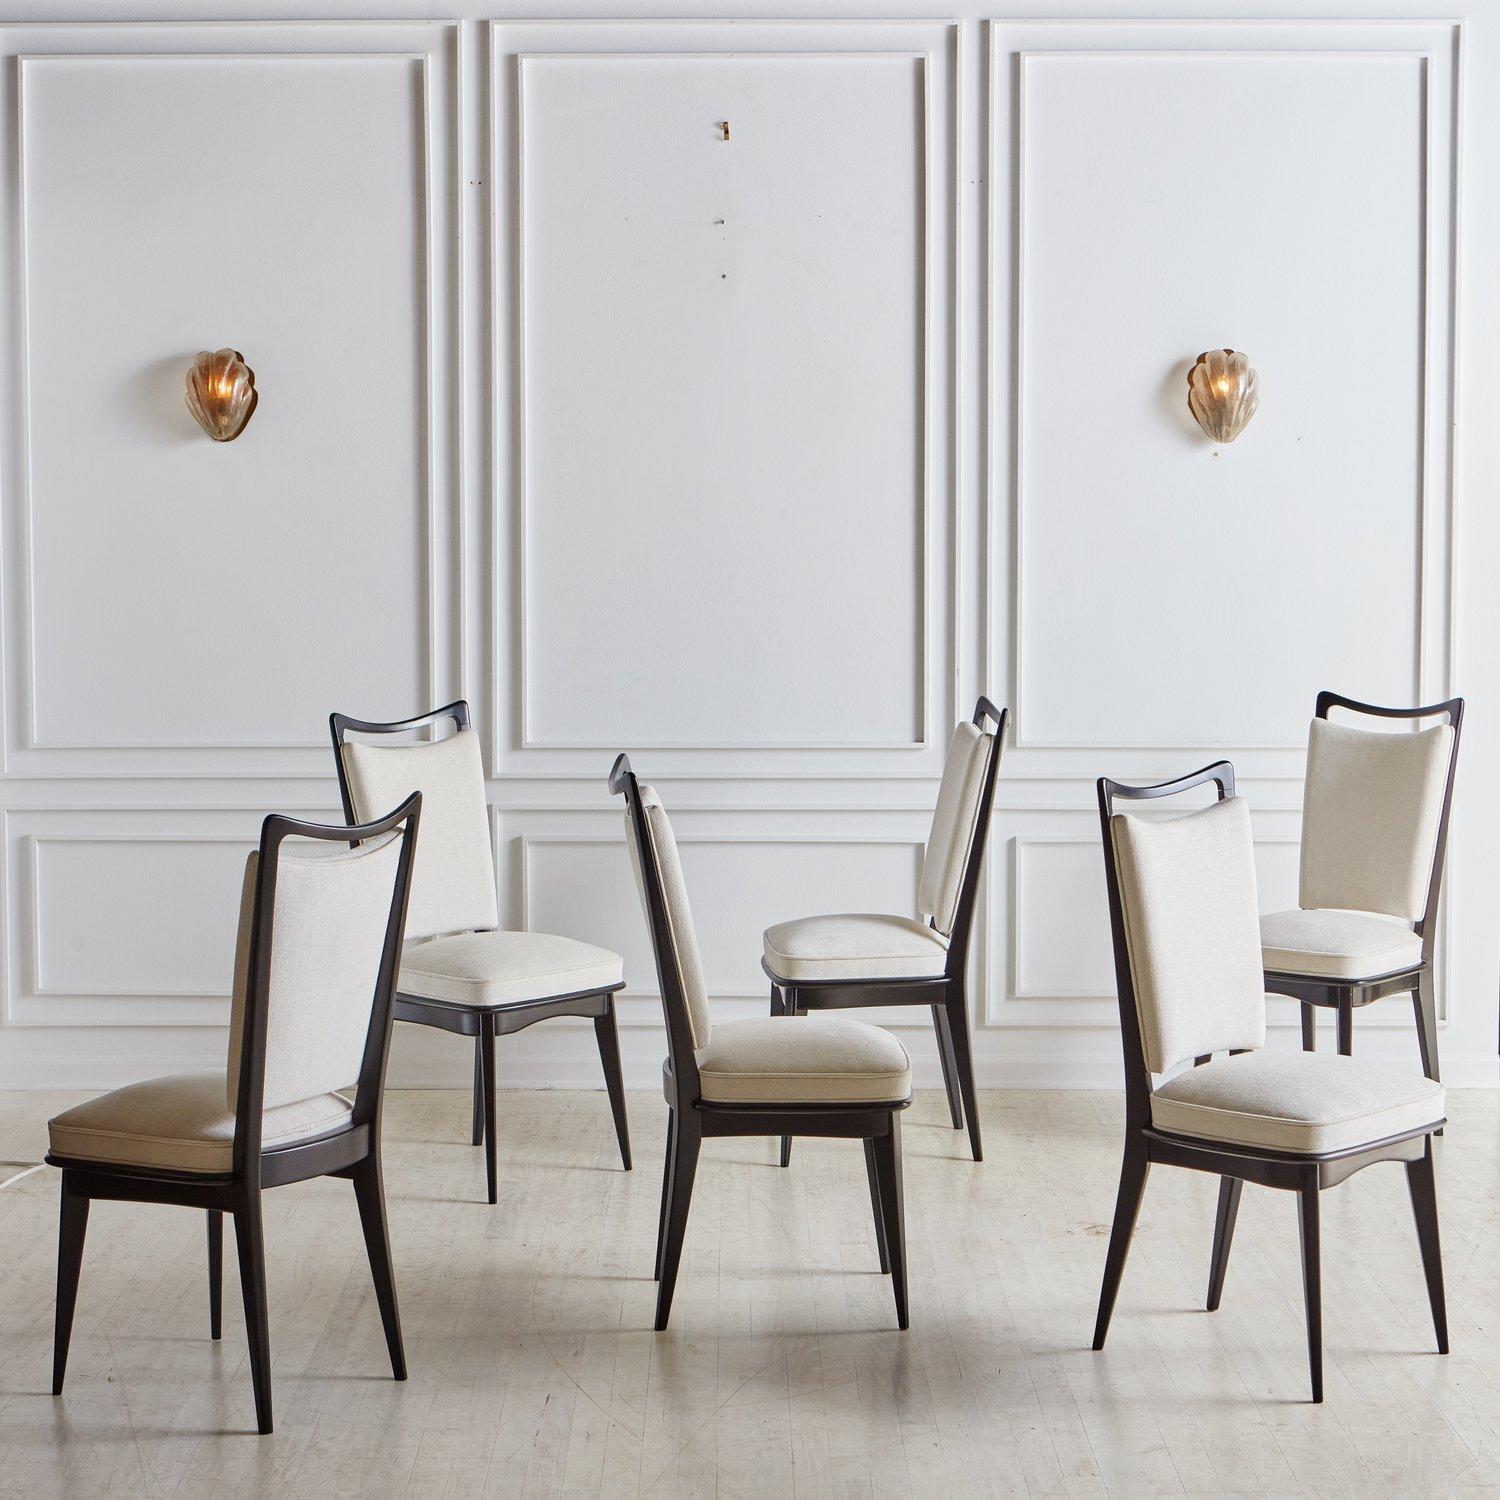 A set of 6 Italian dining chairs freshly reupholstered in a textured white fabric. These chairs have elegant black painted wood frames with subtly tapered legs. We love the classic shape and angular lines on these timeless dining chairs. Sourced in